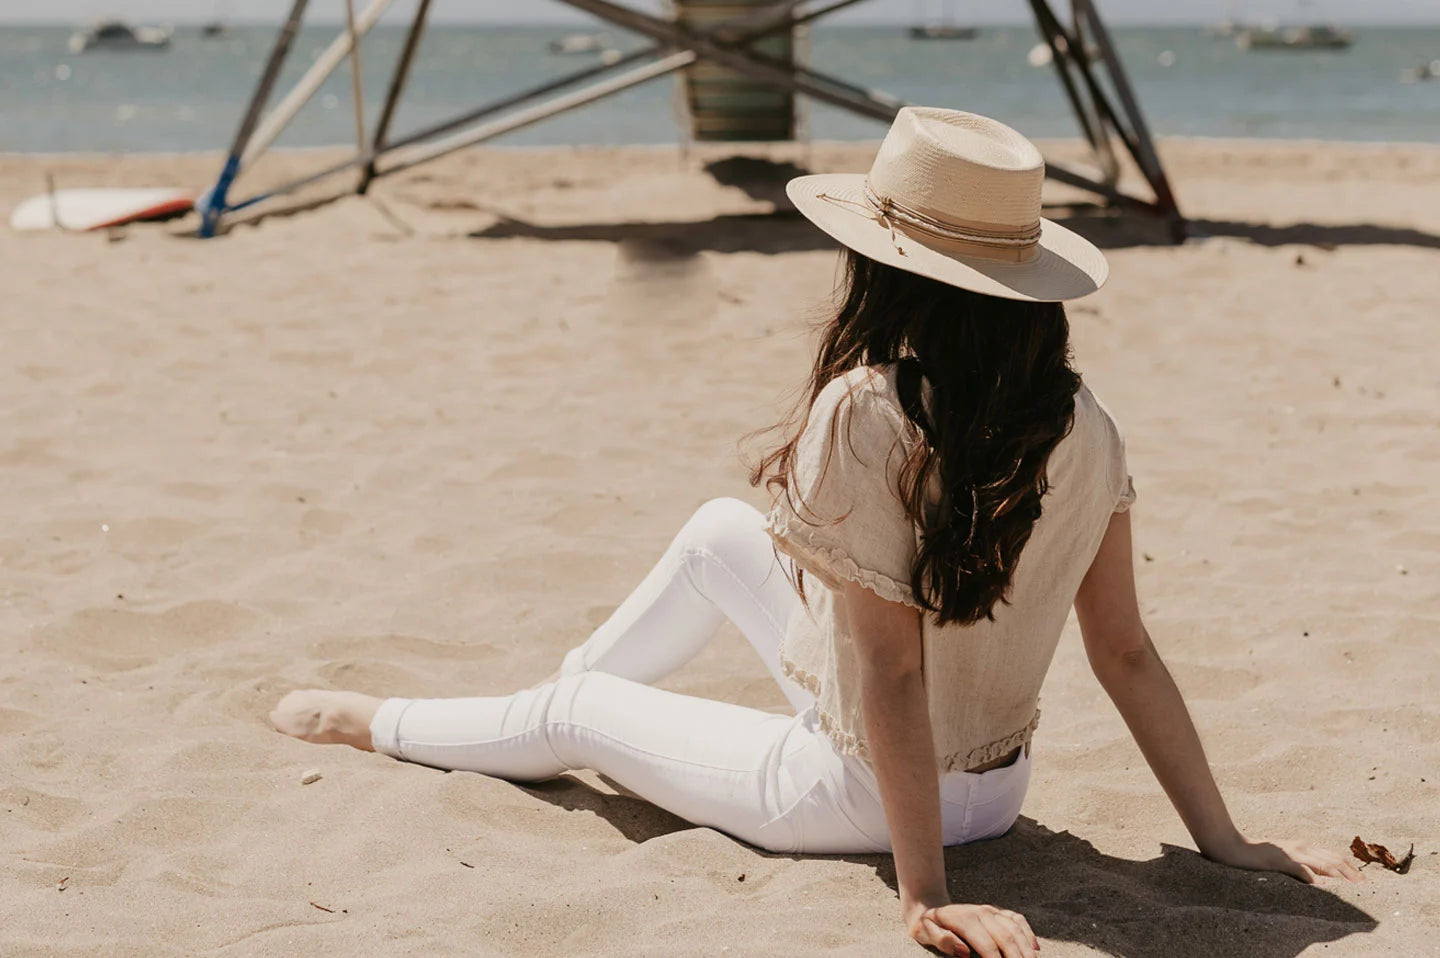 A woman sitting on the sand wearing a tan shirt, white jeans and a straw sun hat